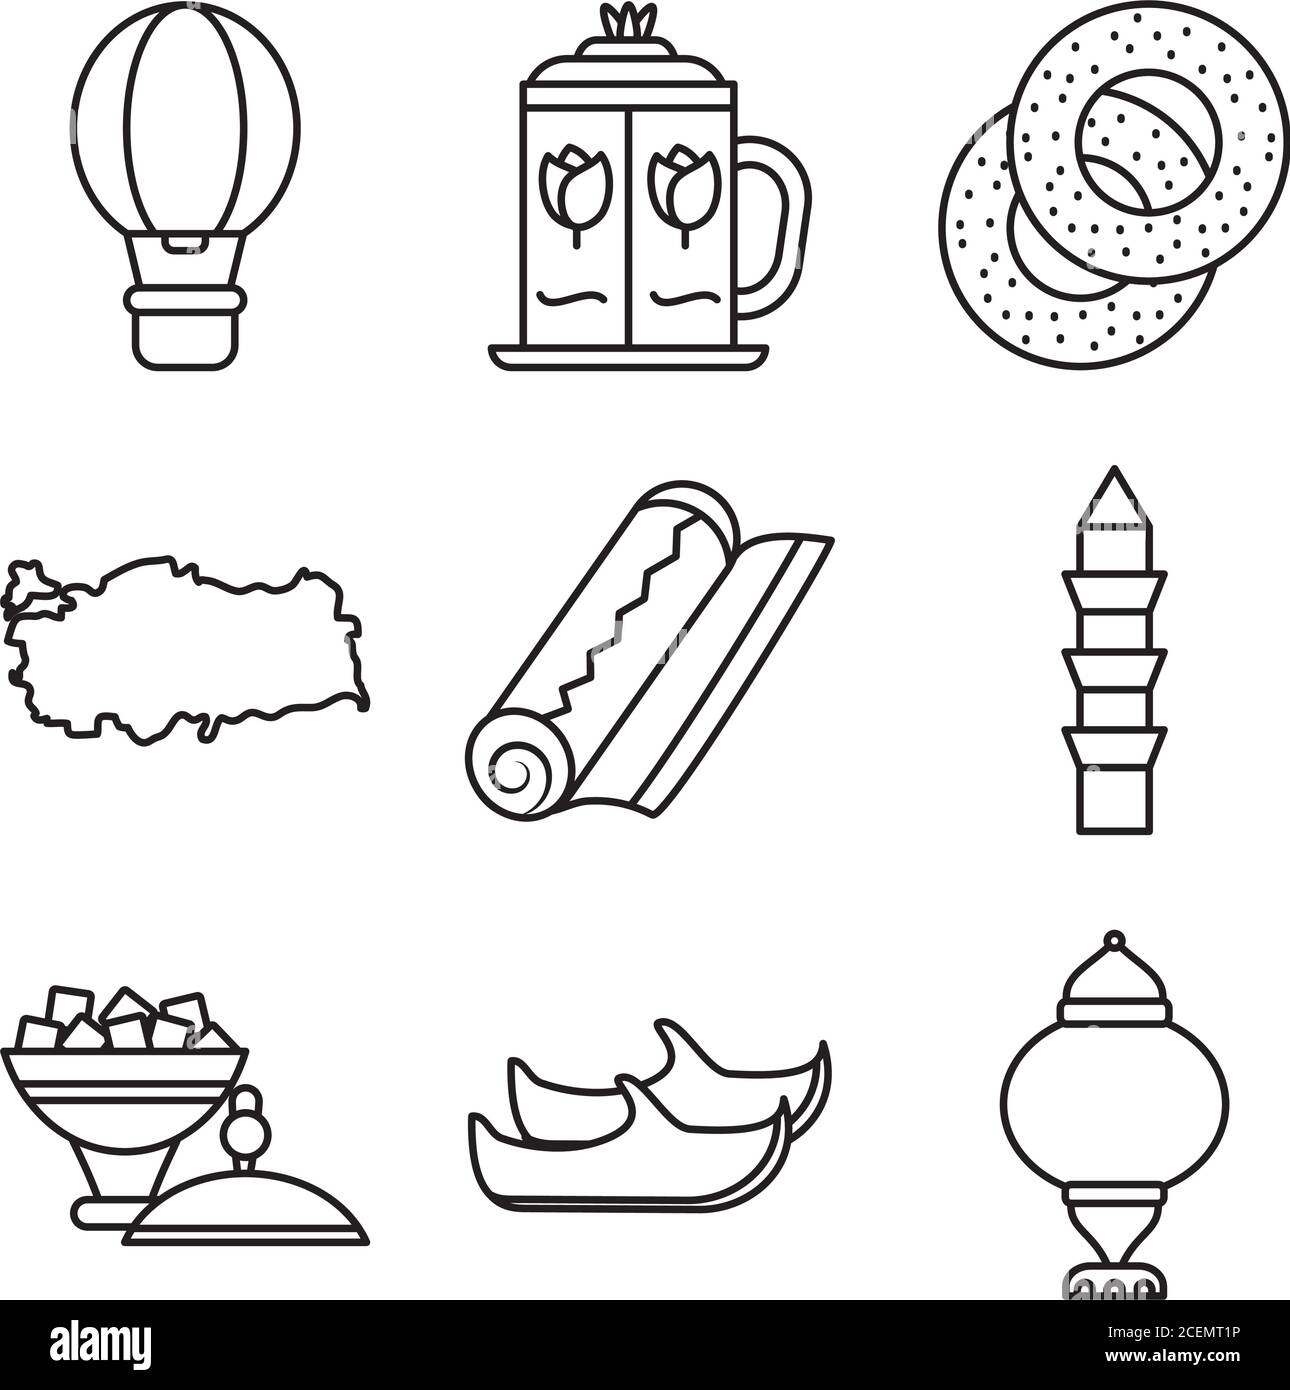 icon set of hot air balloon and turkey country over white background, line style, vector illustration Stock Vector